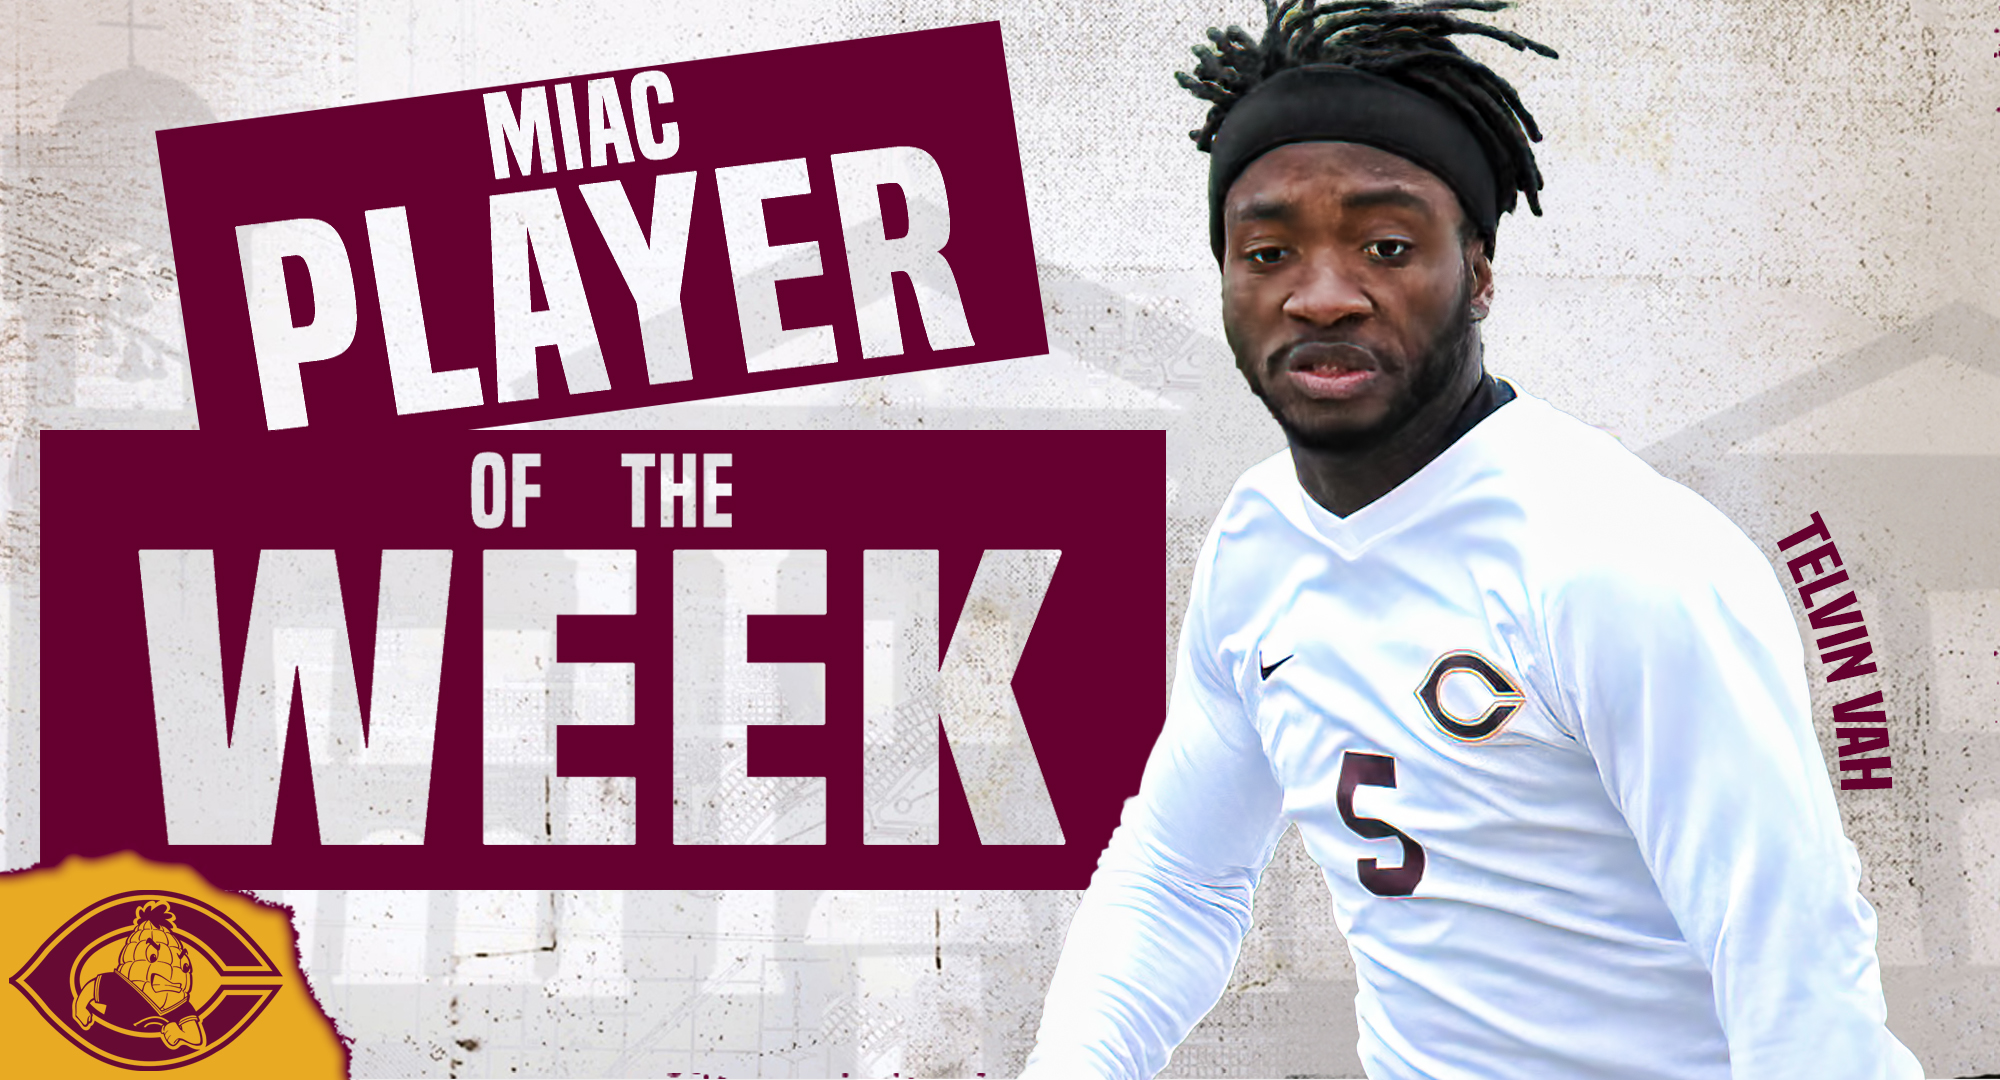 Telvin Vah had two goals, including the game winner in OT against Augsburg on Saturday, and two assists last week and was named the MIAC Player of the Week.